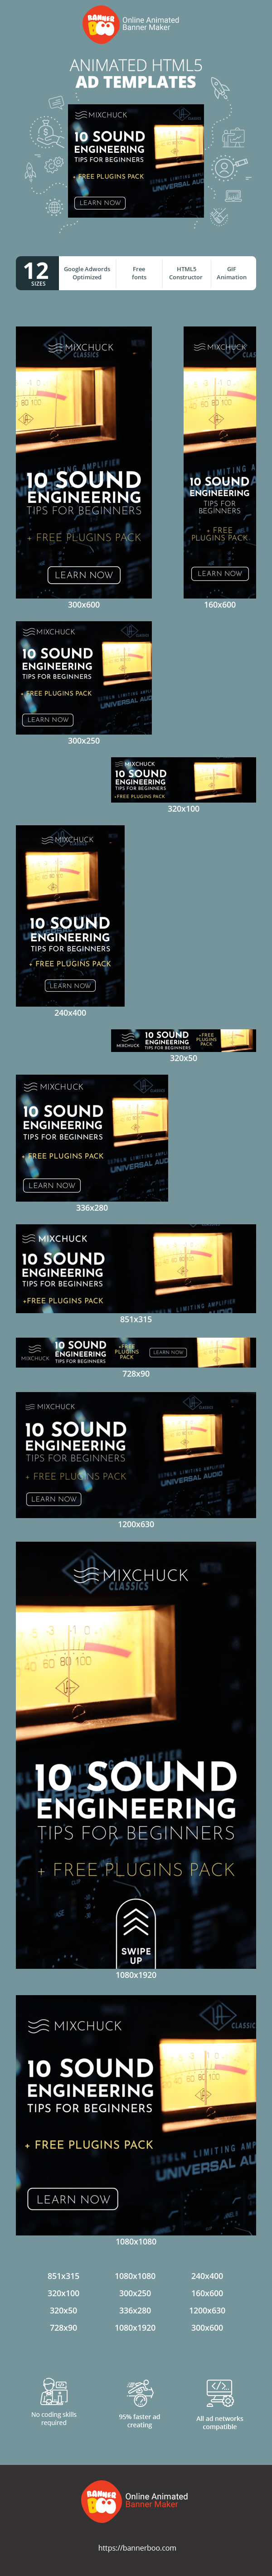 Banner ad template — 10 Sound Engineering Tips For Beginners — Free Plugins Pack